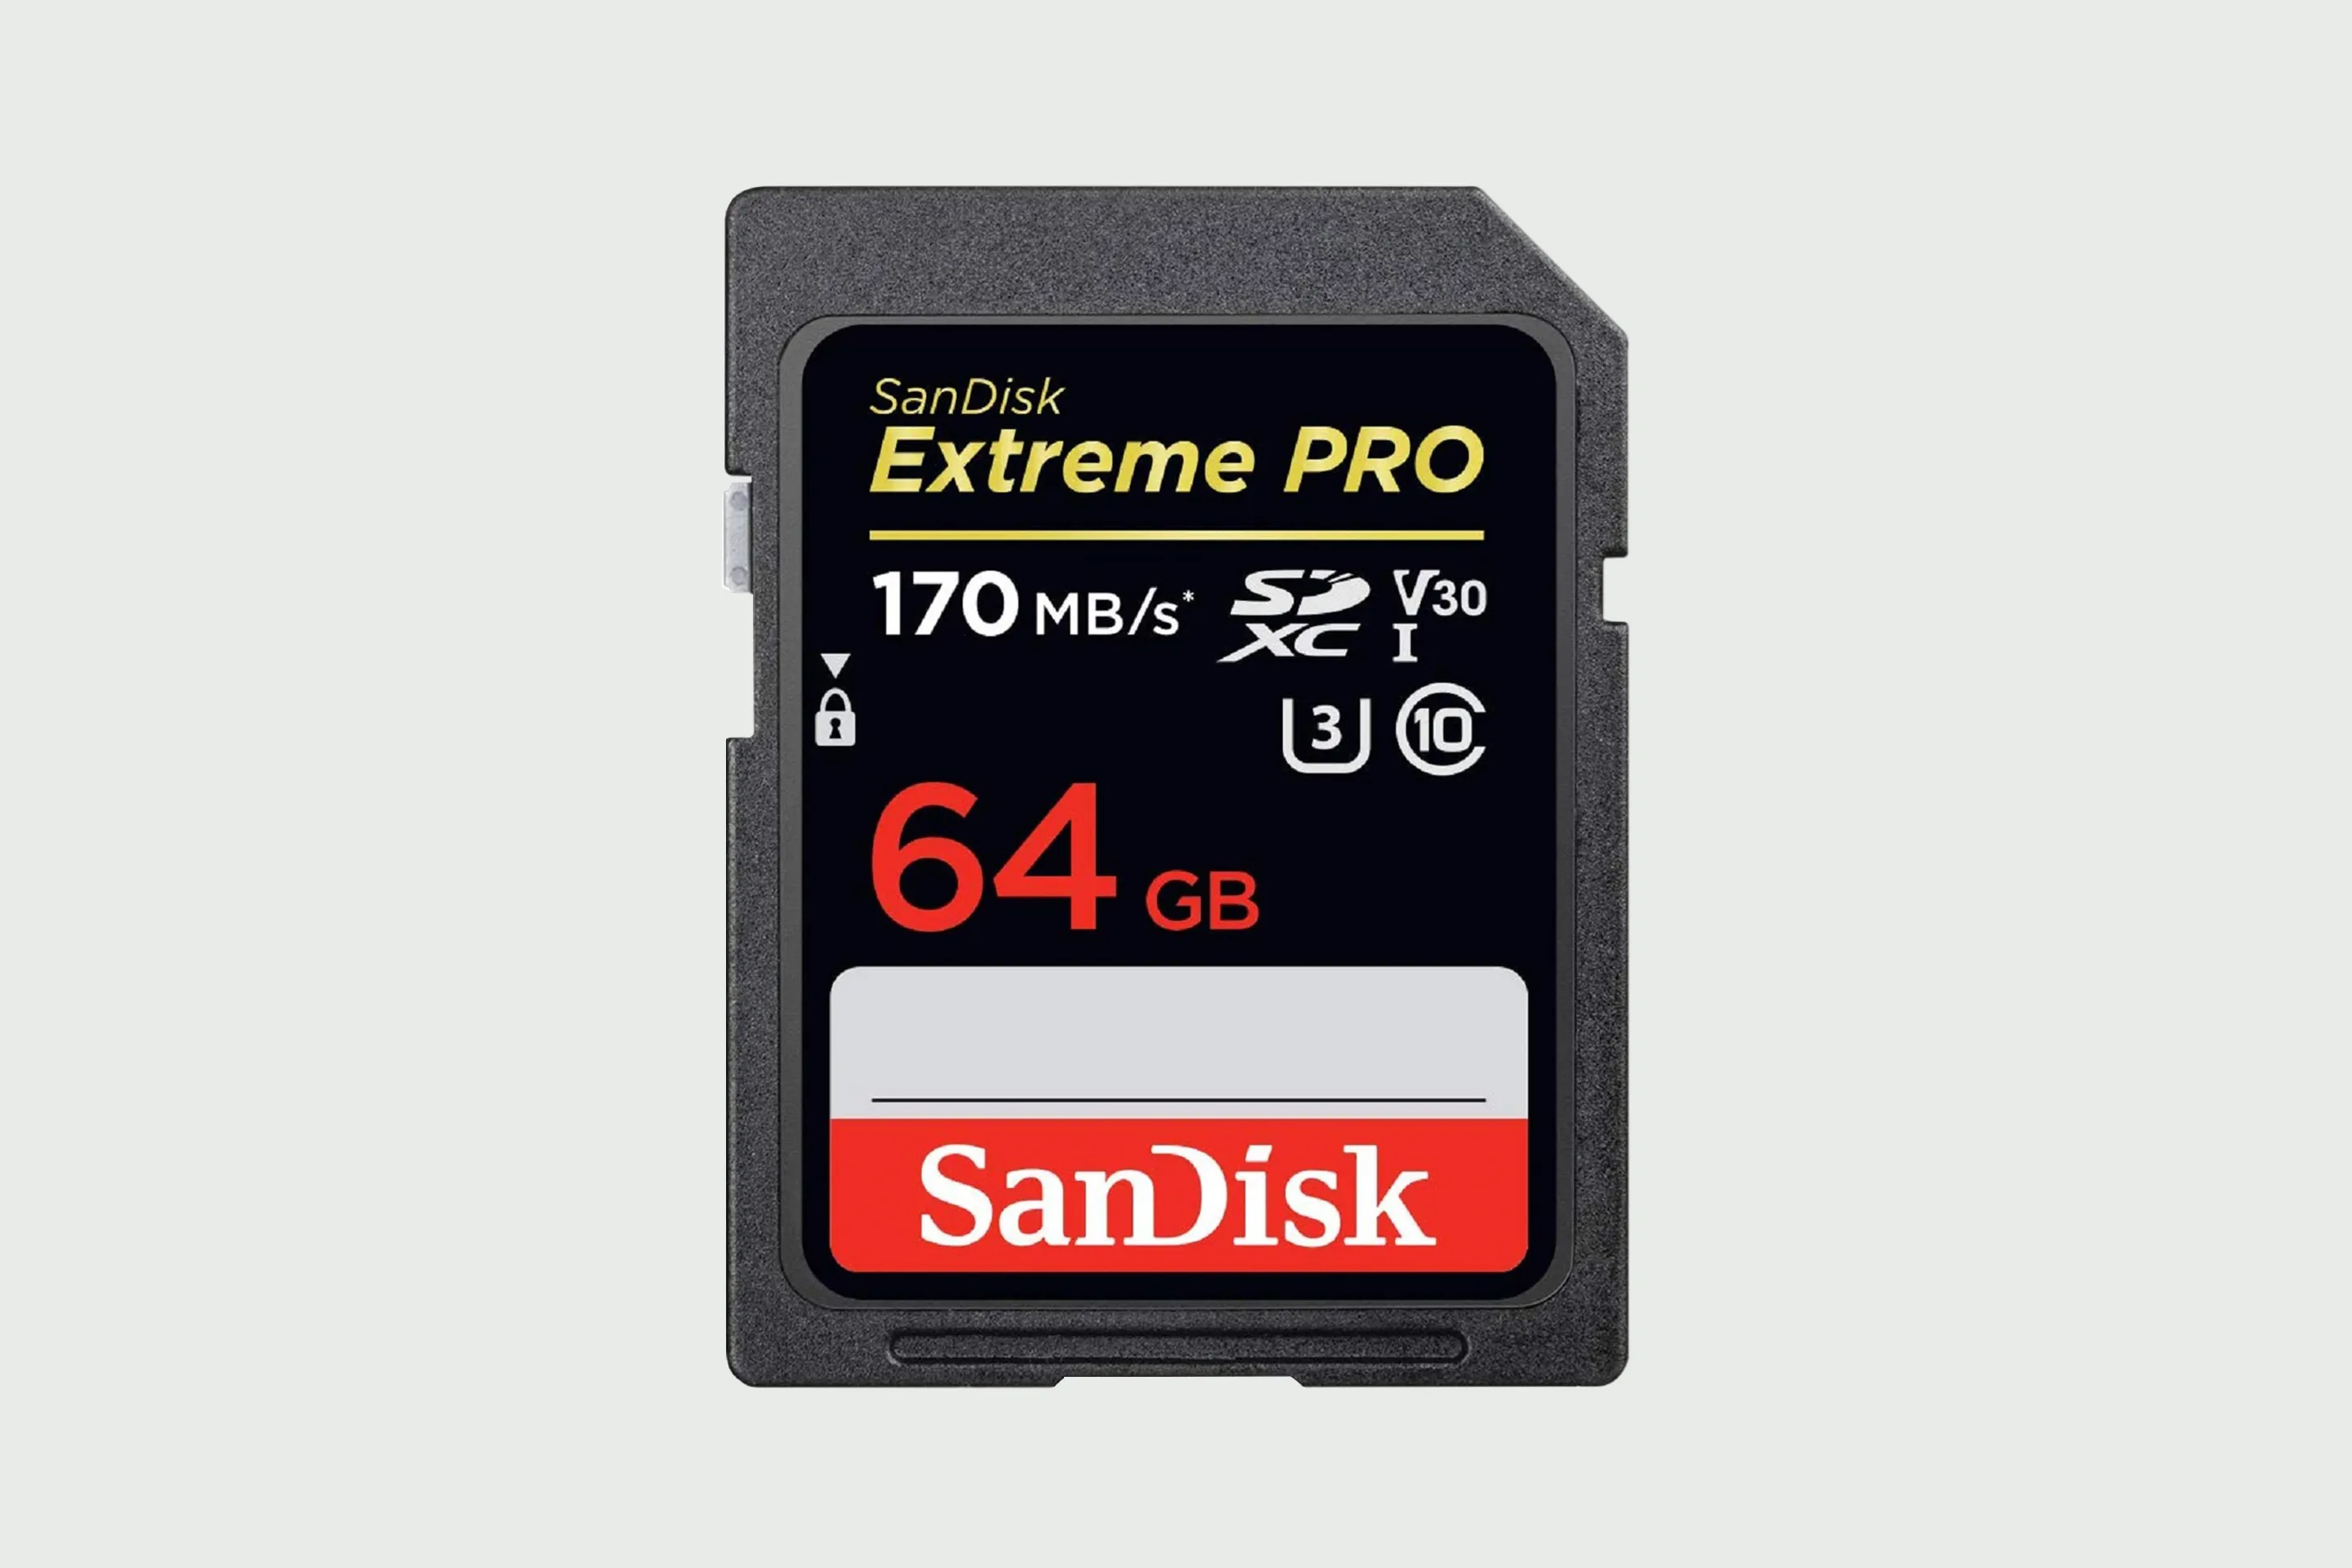 MicroSD Cards on Sale for All-Time Low Prices - IGN